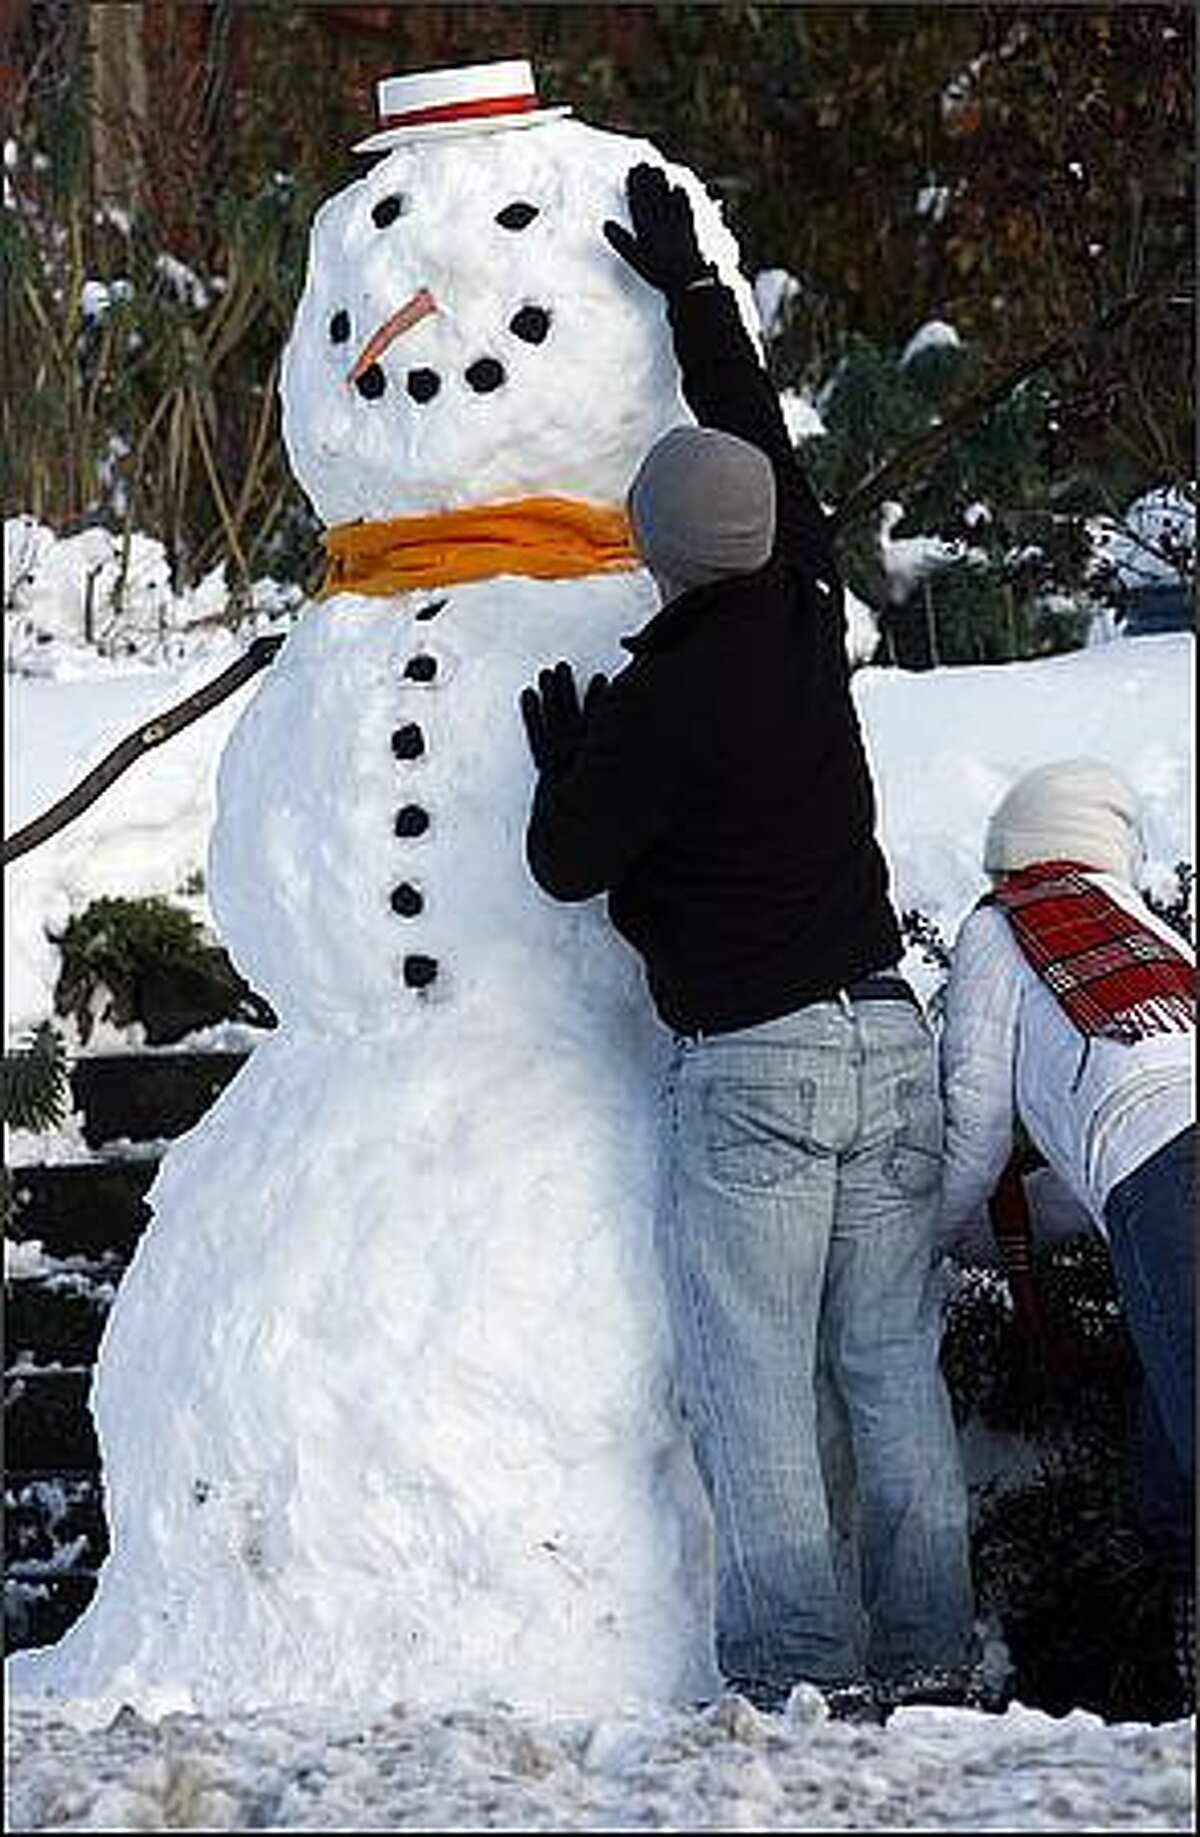 Jeff Olson puts the finishing touches on an 8-foot snowman guilt by him and his girlfriend, Veronica Nim, in front of Nim's house on Fauntleroy Way in West Seattle. "It's not the biggest one we've done," Olson said recalling a 15-footer he built with the help of a football team several years back. Dec. 22, 2008.